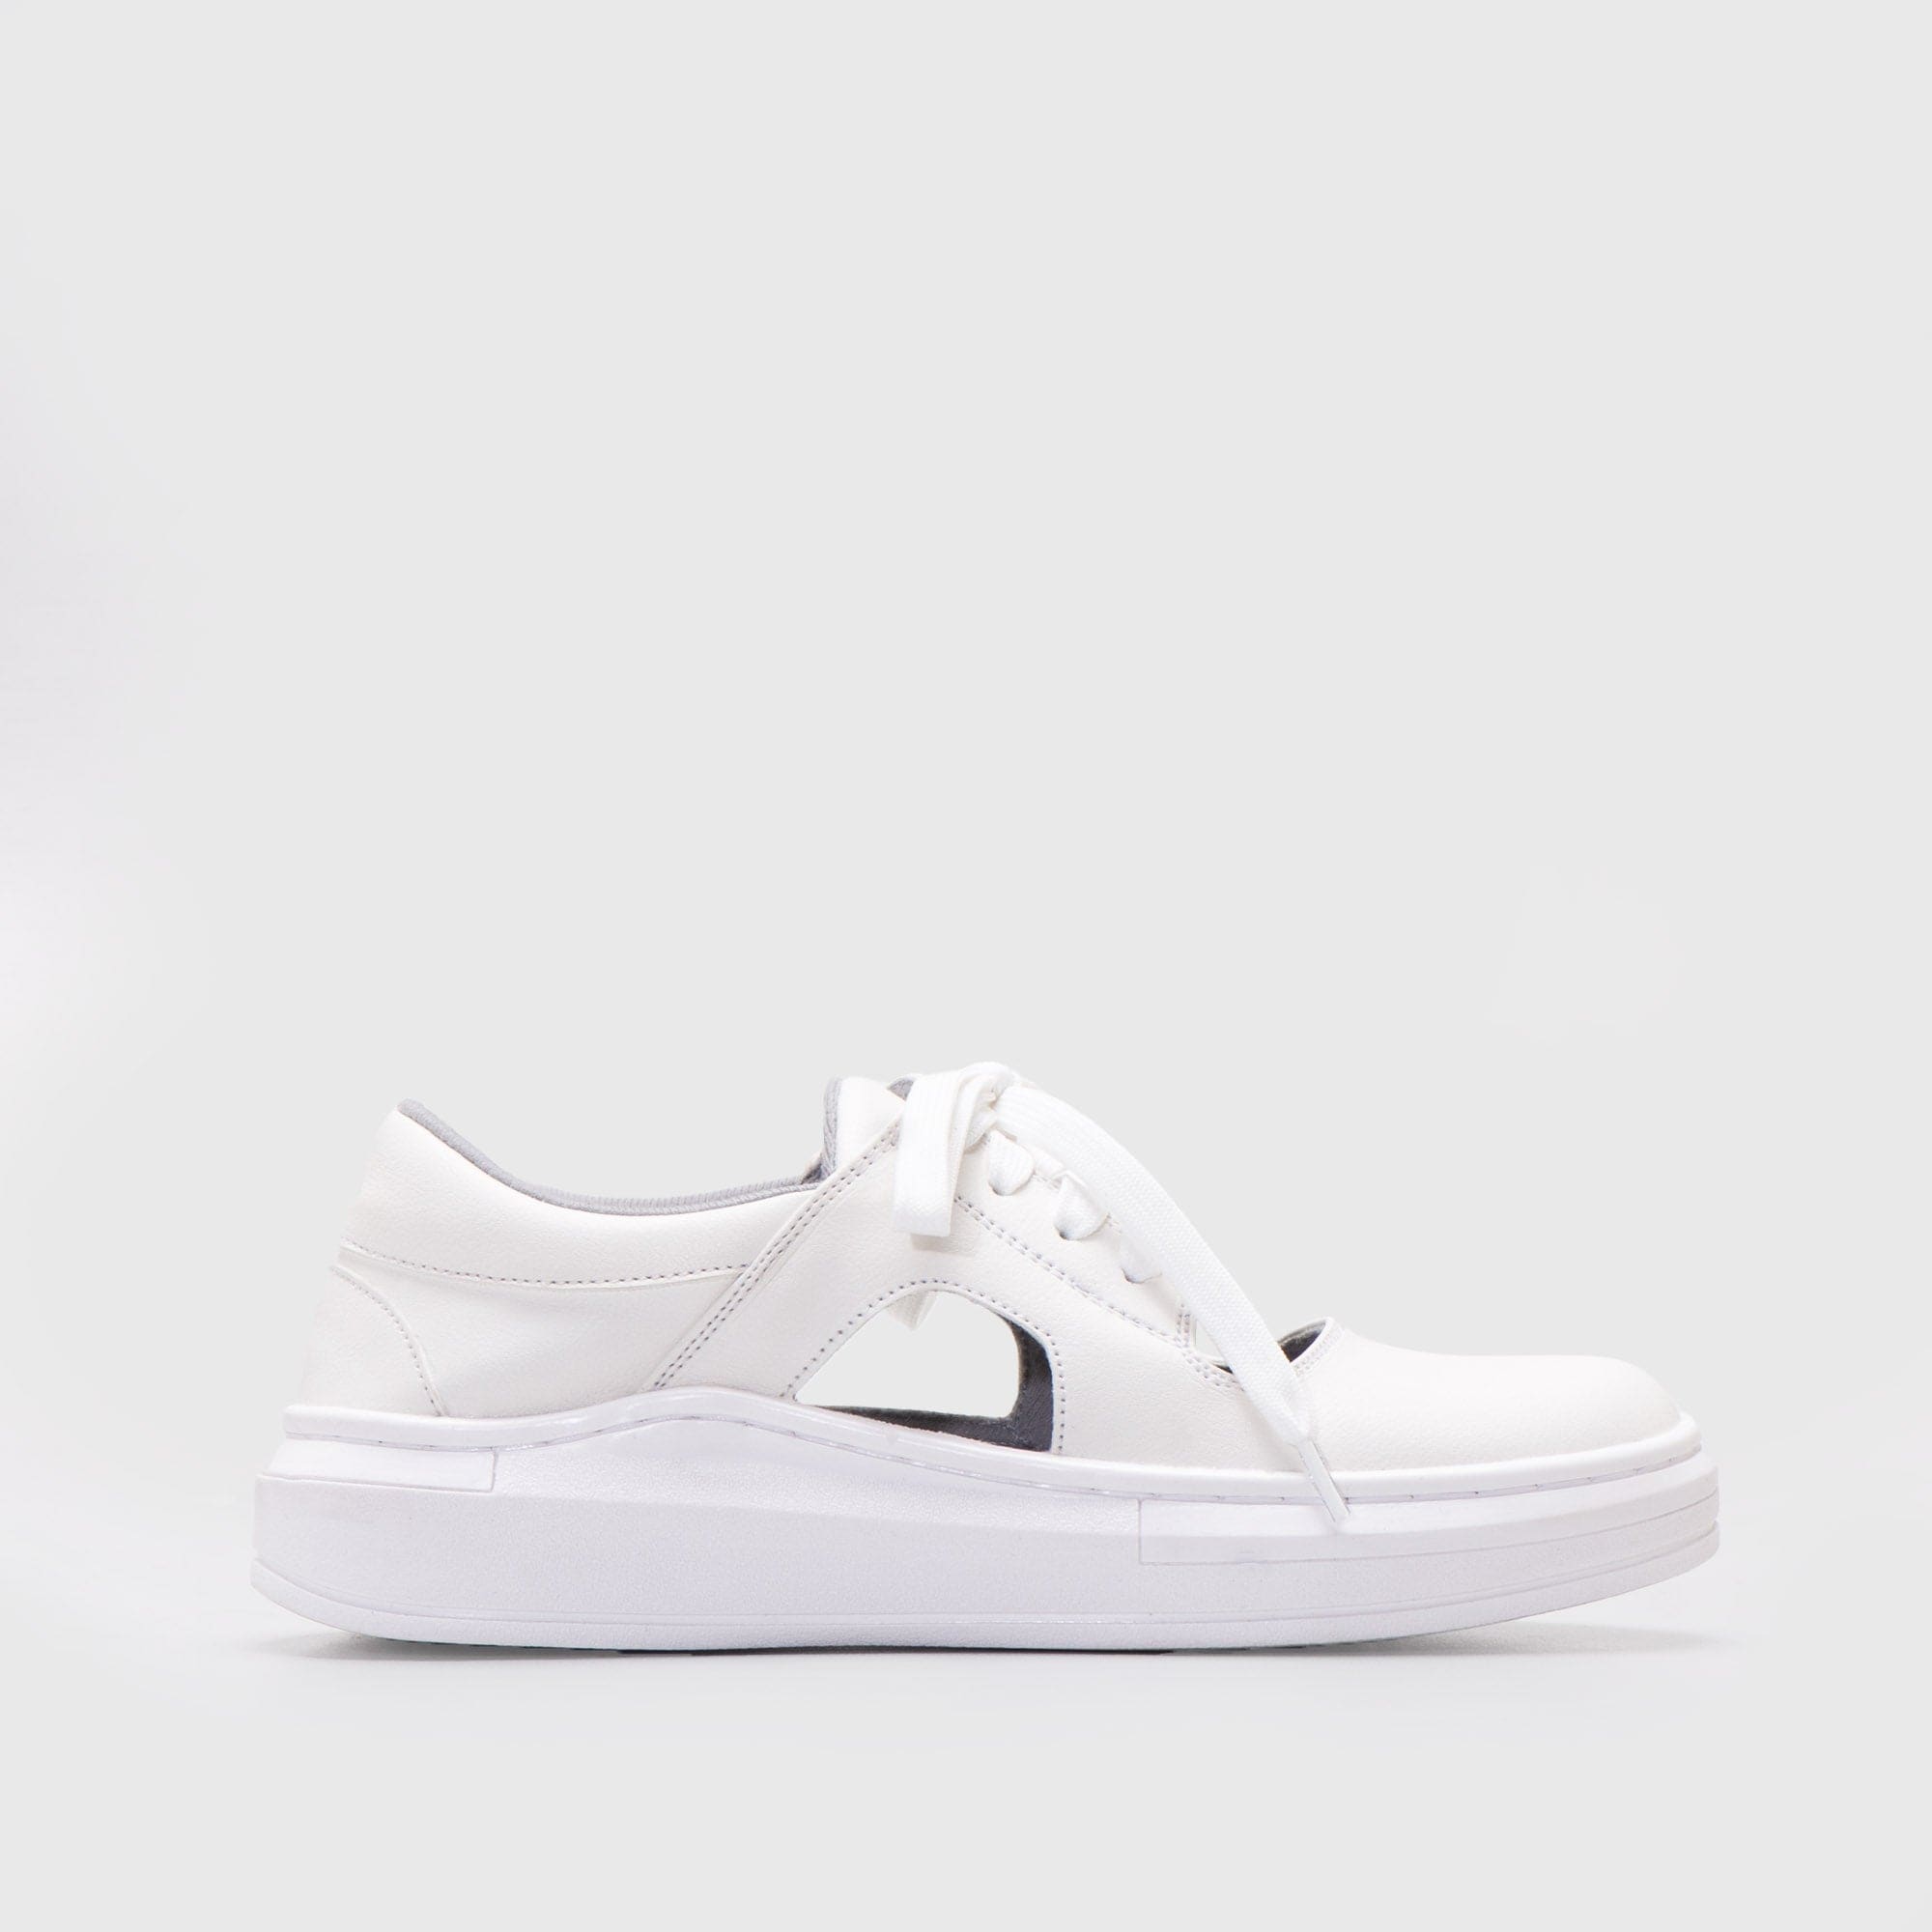 Adorable Projects Official Adorableprojects - Nicholet Sneakers White - Sneakers Putih